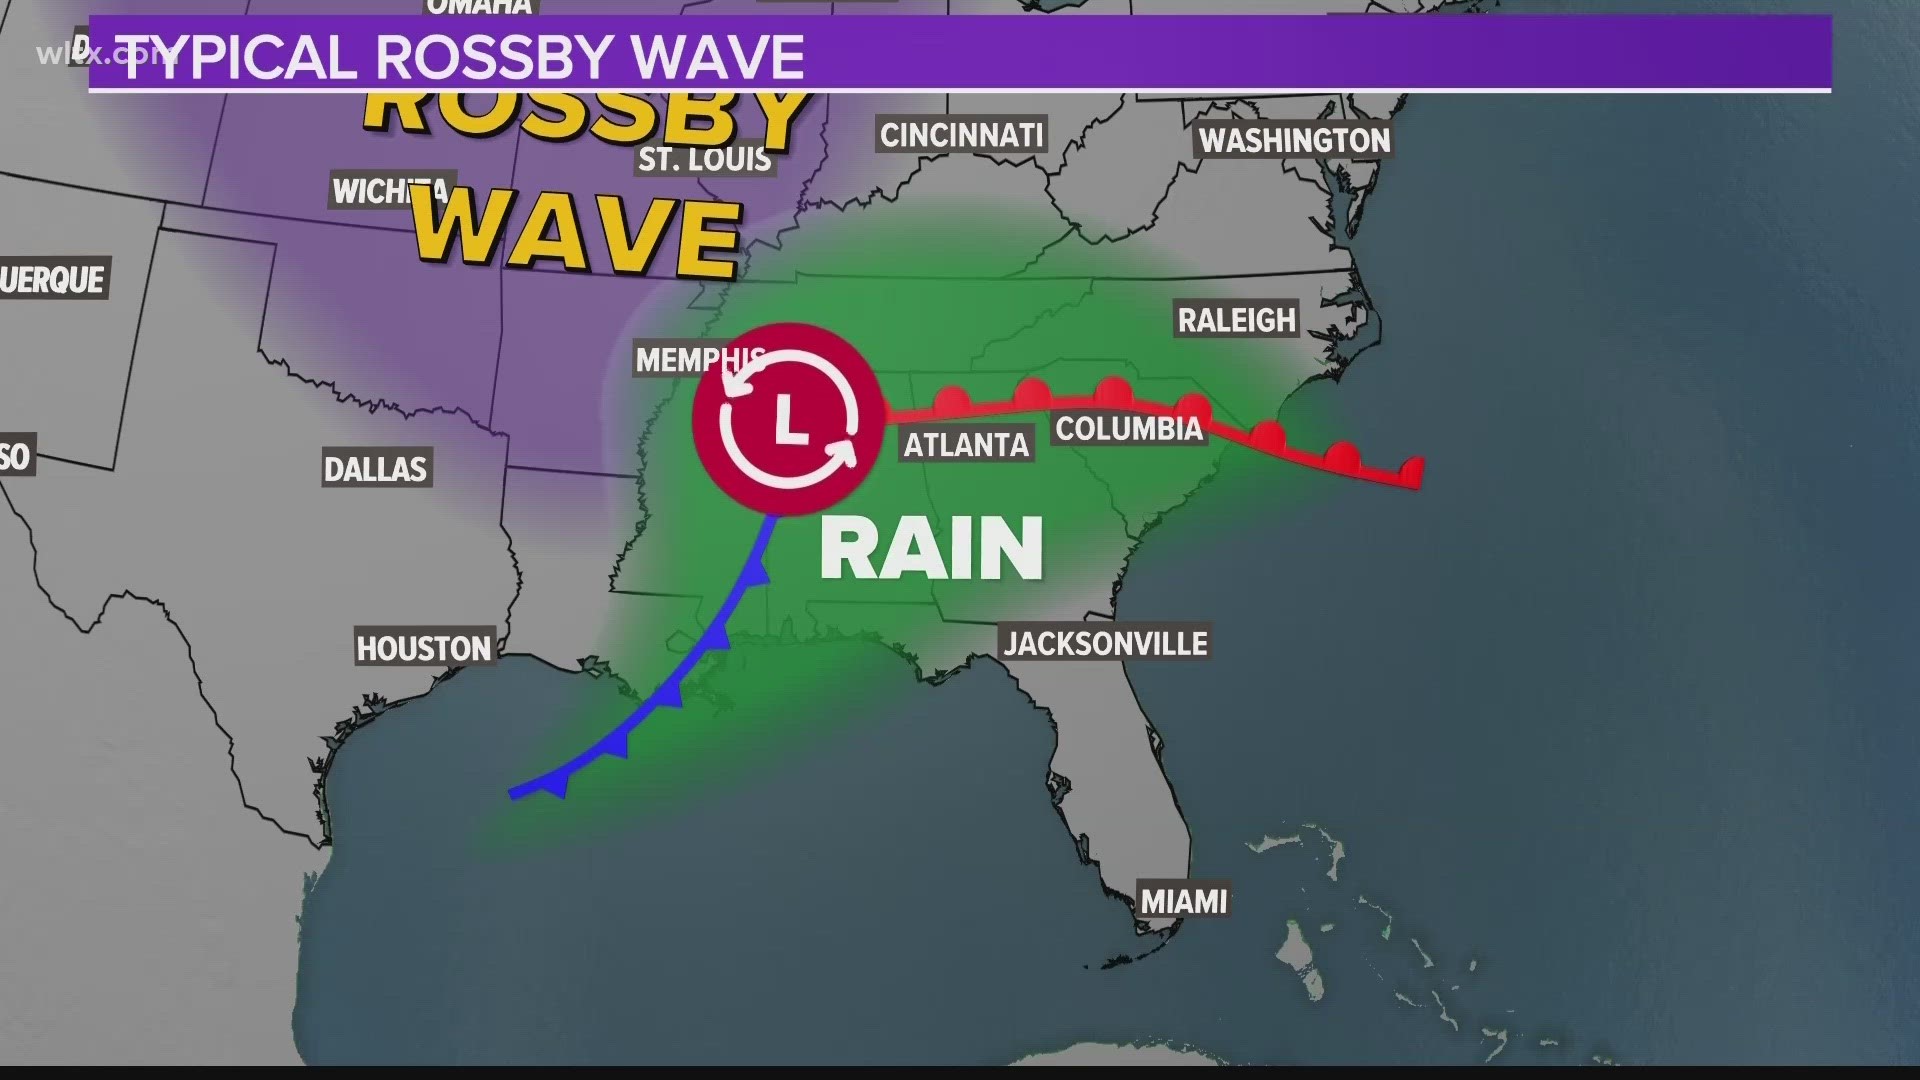 There's a reason why it's been raining so much on Fridays, and it has to do with something called Rossby Waves.